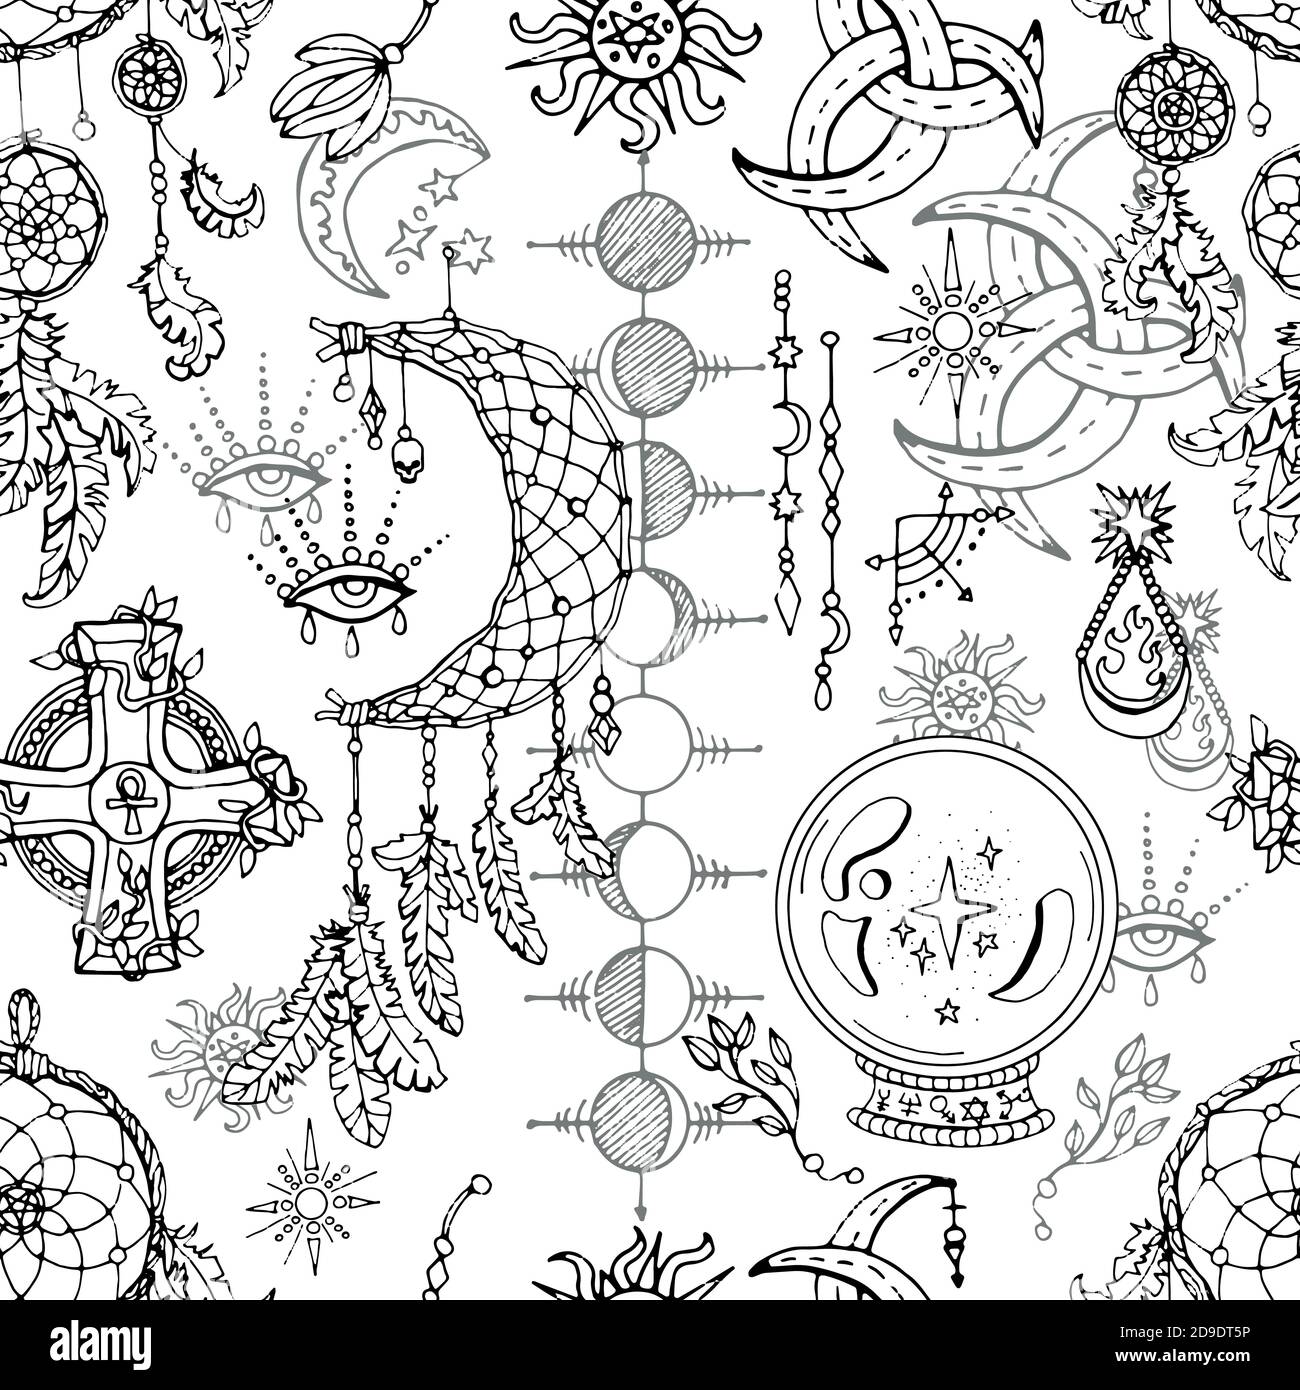 Seamless pattern with magic objects and spiritual design elements - dreamcatcher, crystal, moon phases. Mystic background for Halloween, esoteric, got Stock Vector